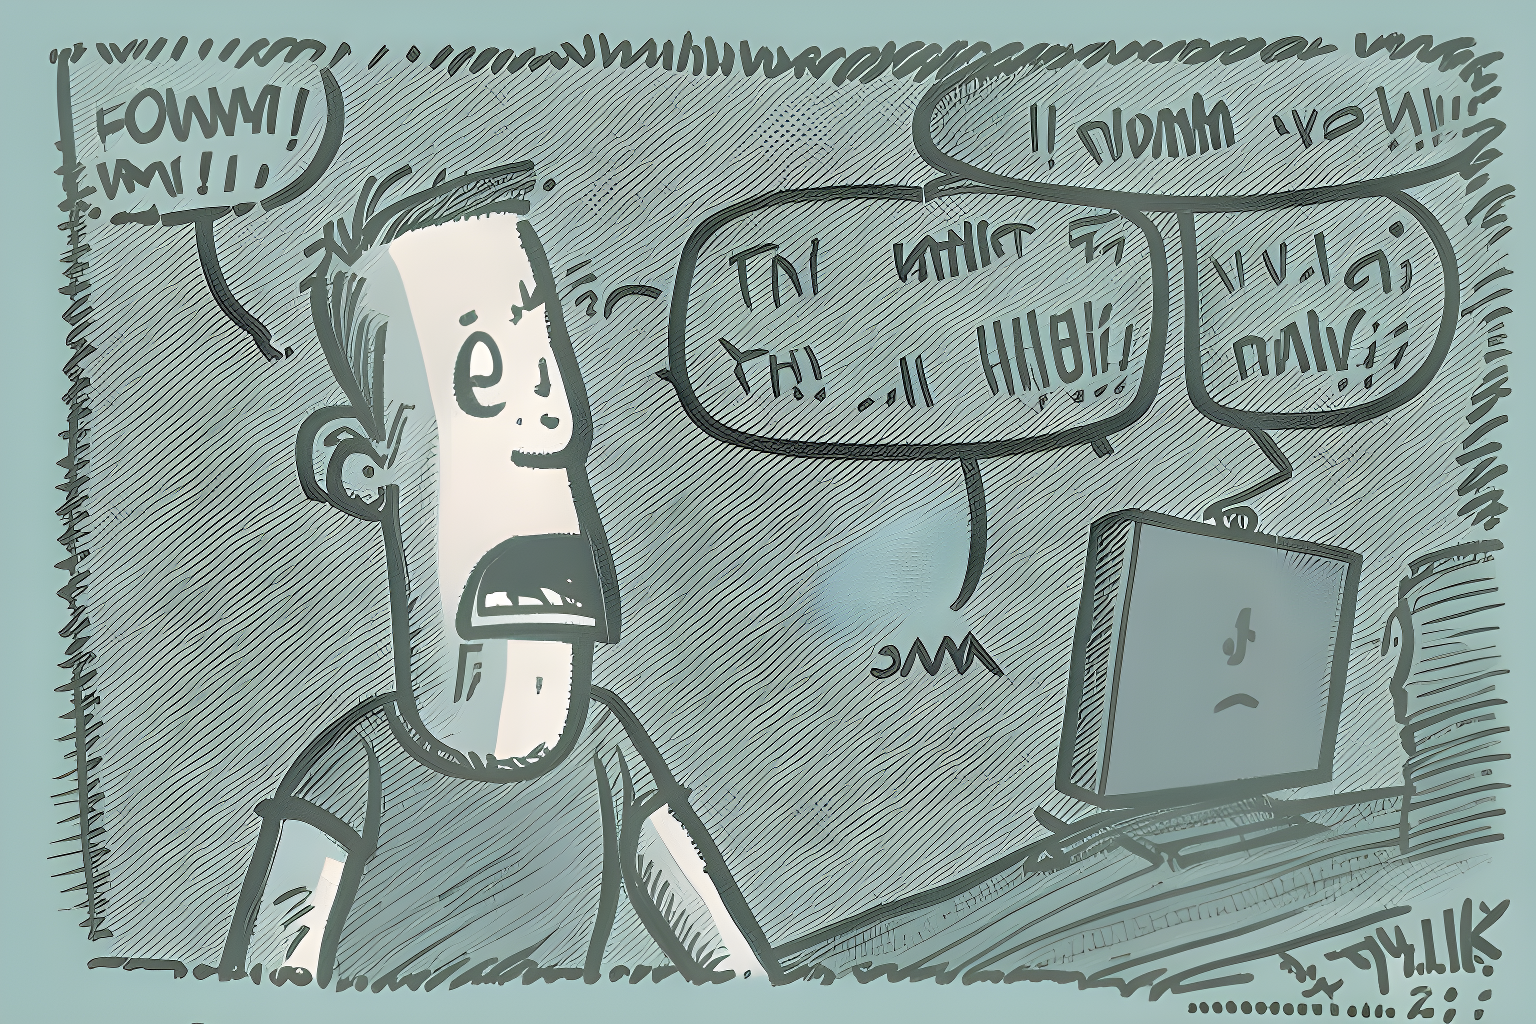 a comic like image of a human commenting on a website